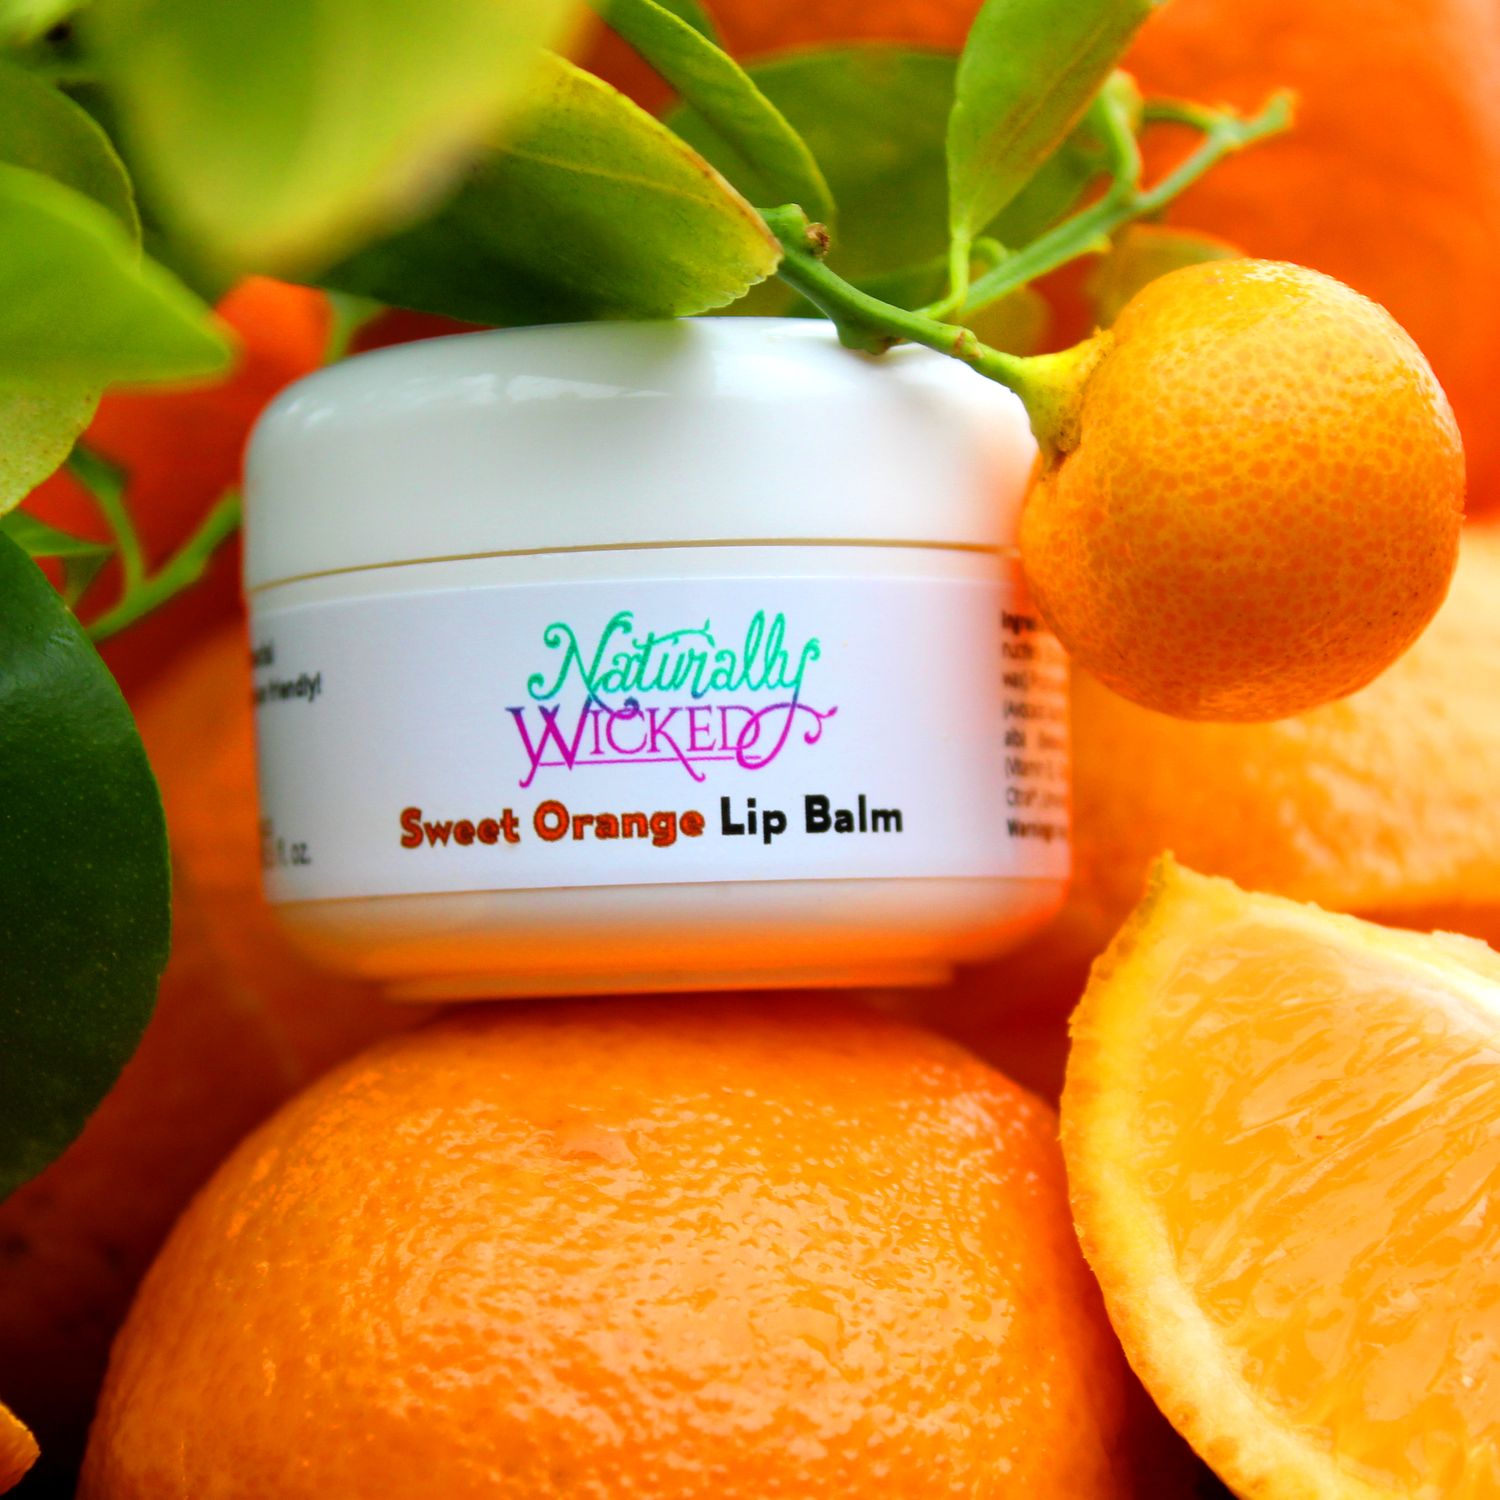 Naturally Wicked Sweet Orange Lip Balm Sat On Top Of Orange Besides A Green Citrus Tree With Fruits Attached